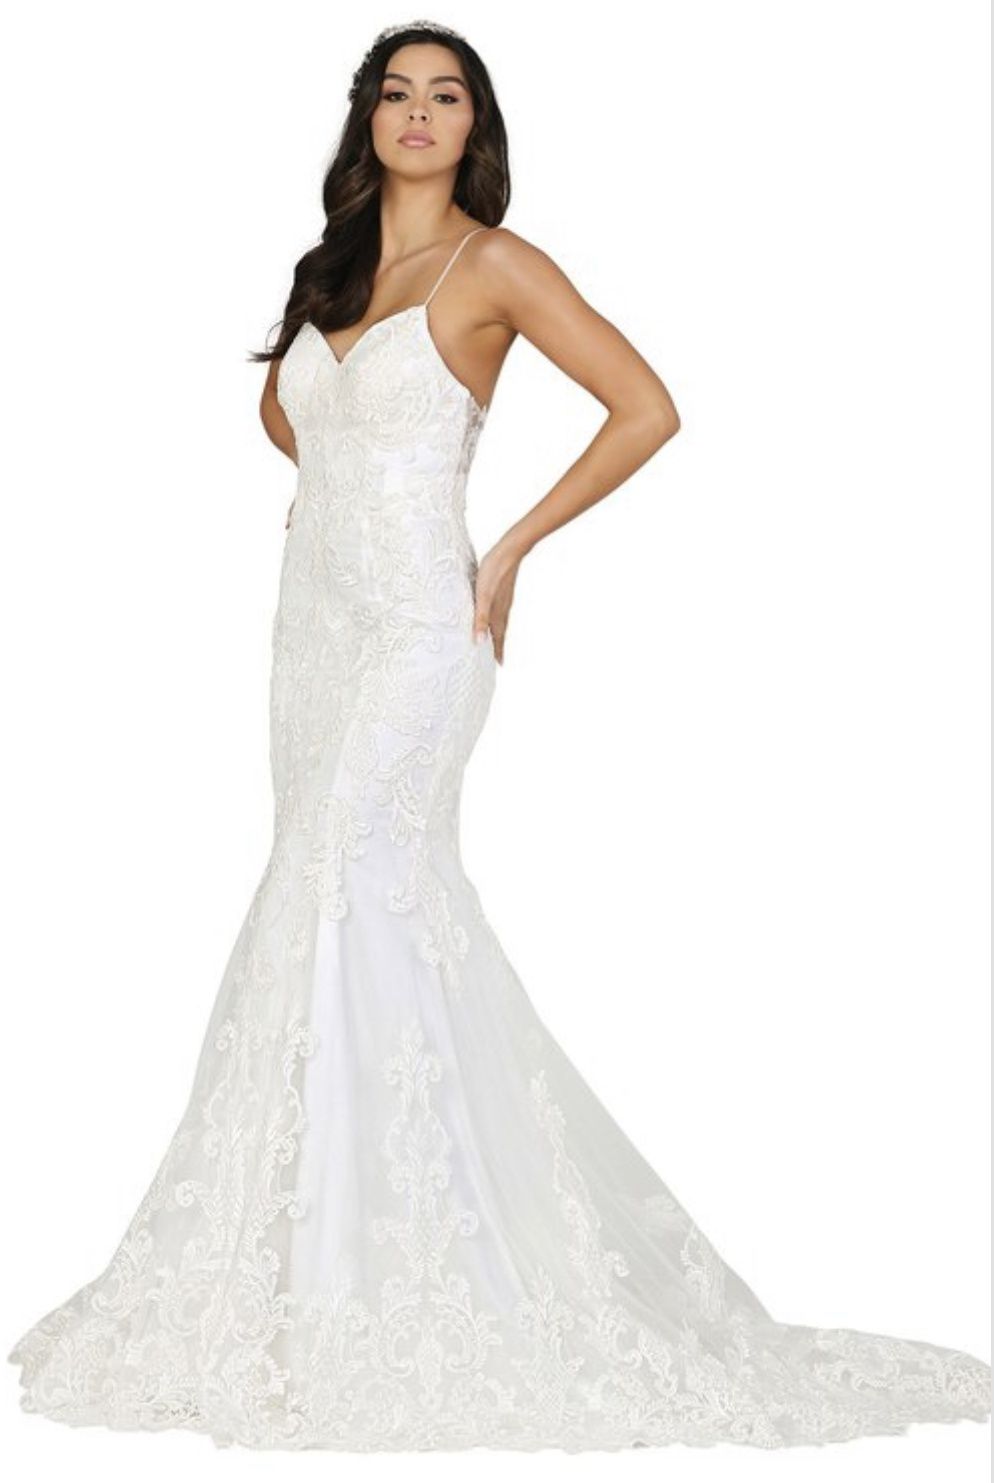 Plus Size 16 Wedding Lace White Mermaid Dress on Queenly